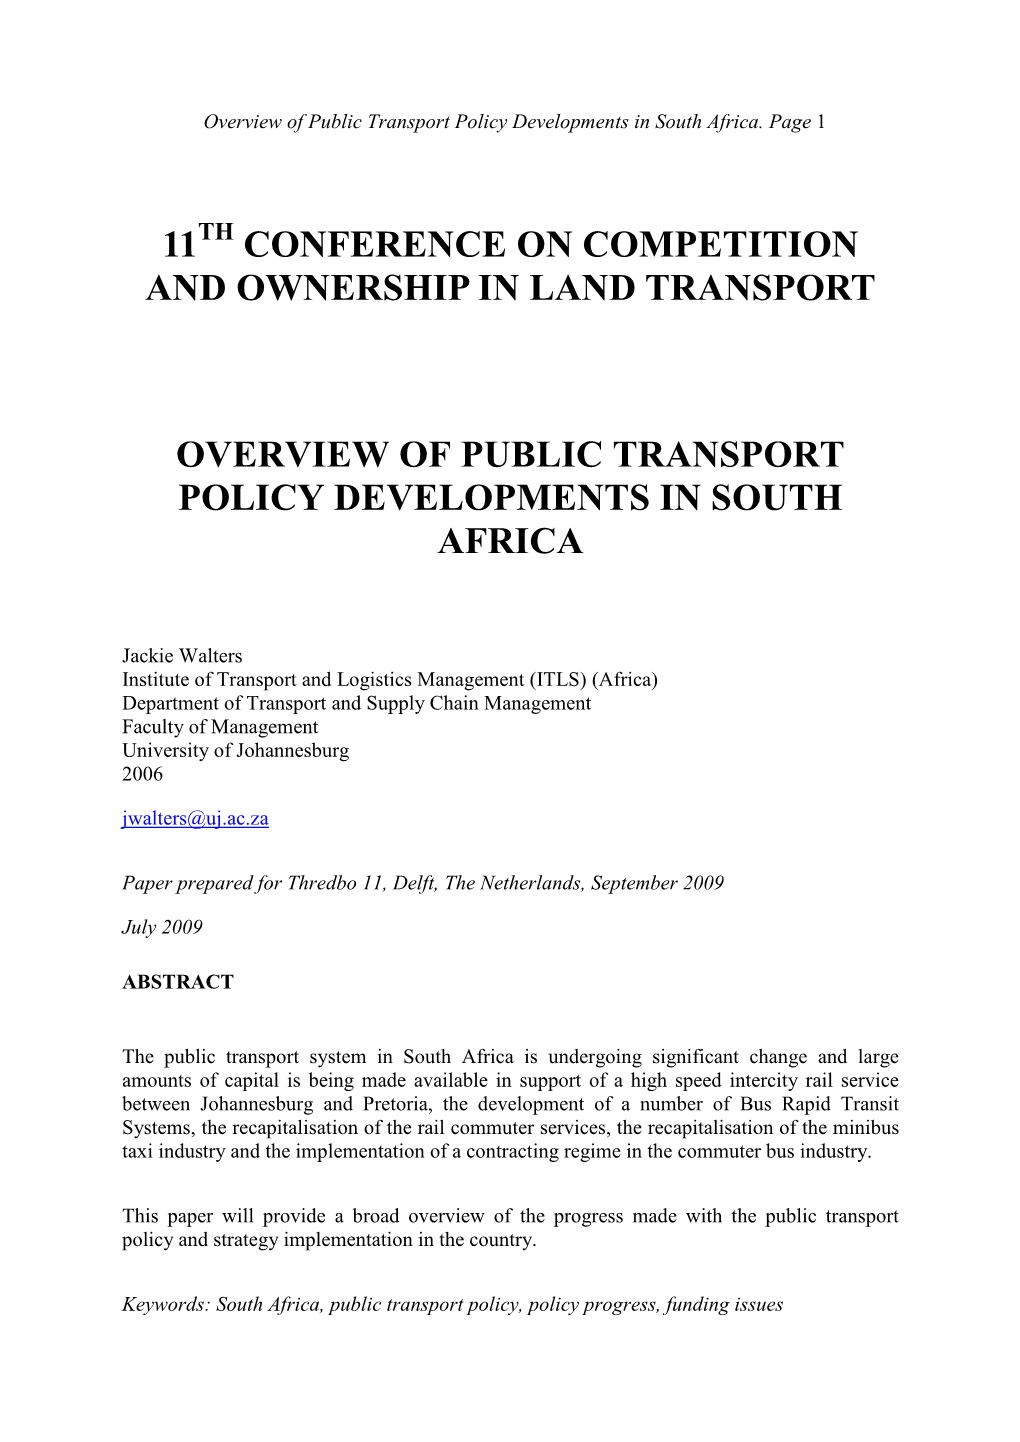 Conference on Competition and Ownership in Land Transport